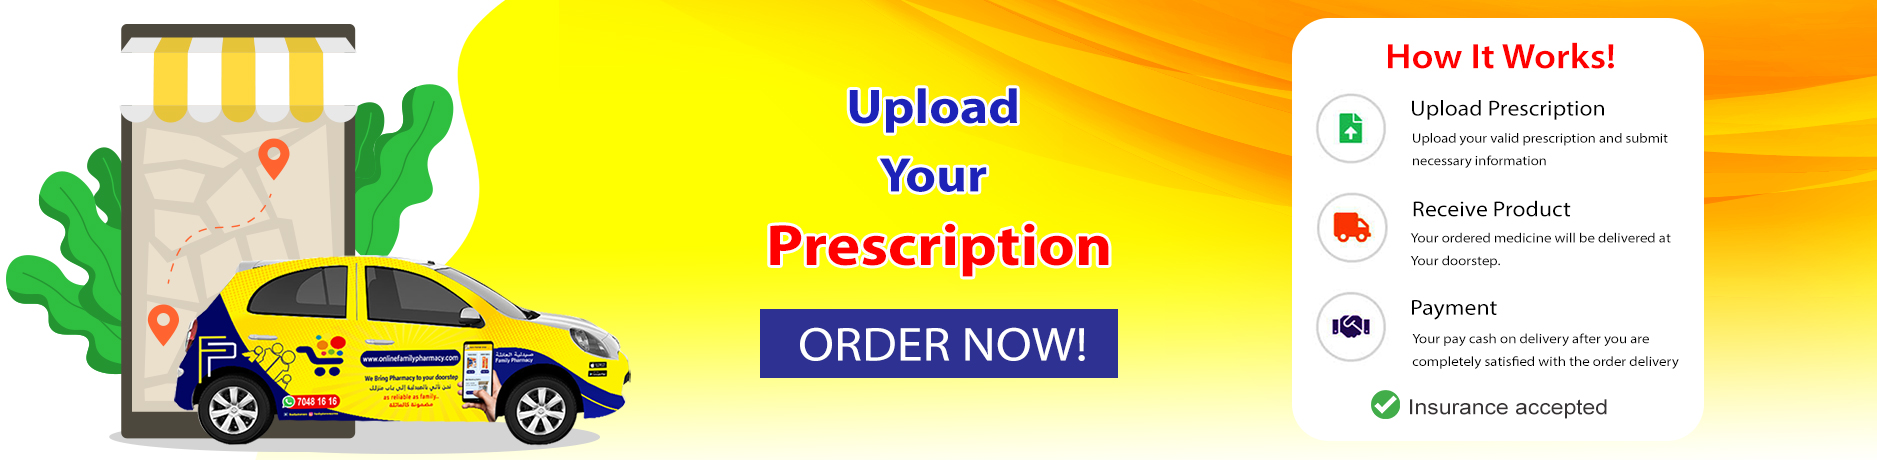 Shop for  Diagnostics, Disposables, First-Aid Products, Medicine, Disposables, Wound Dressing, Supports, Rehabilitation Aids, Instruments, Machines, Clinic Setup, Emergency, OTC Products, Baby Care at online family pharmacy 